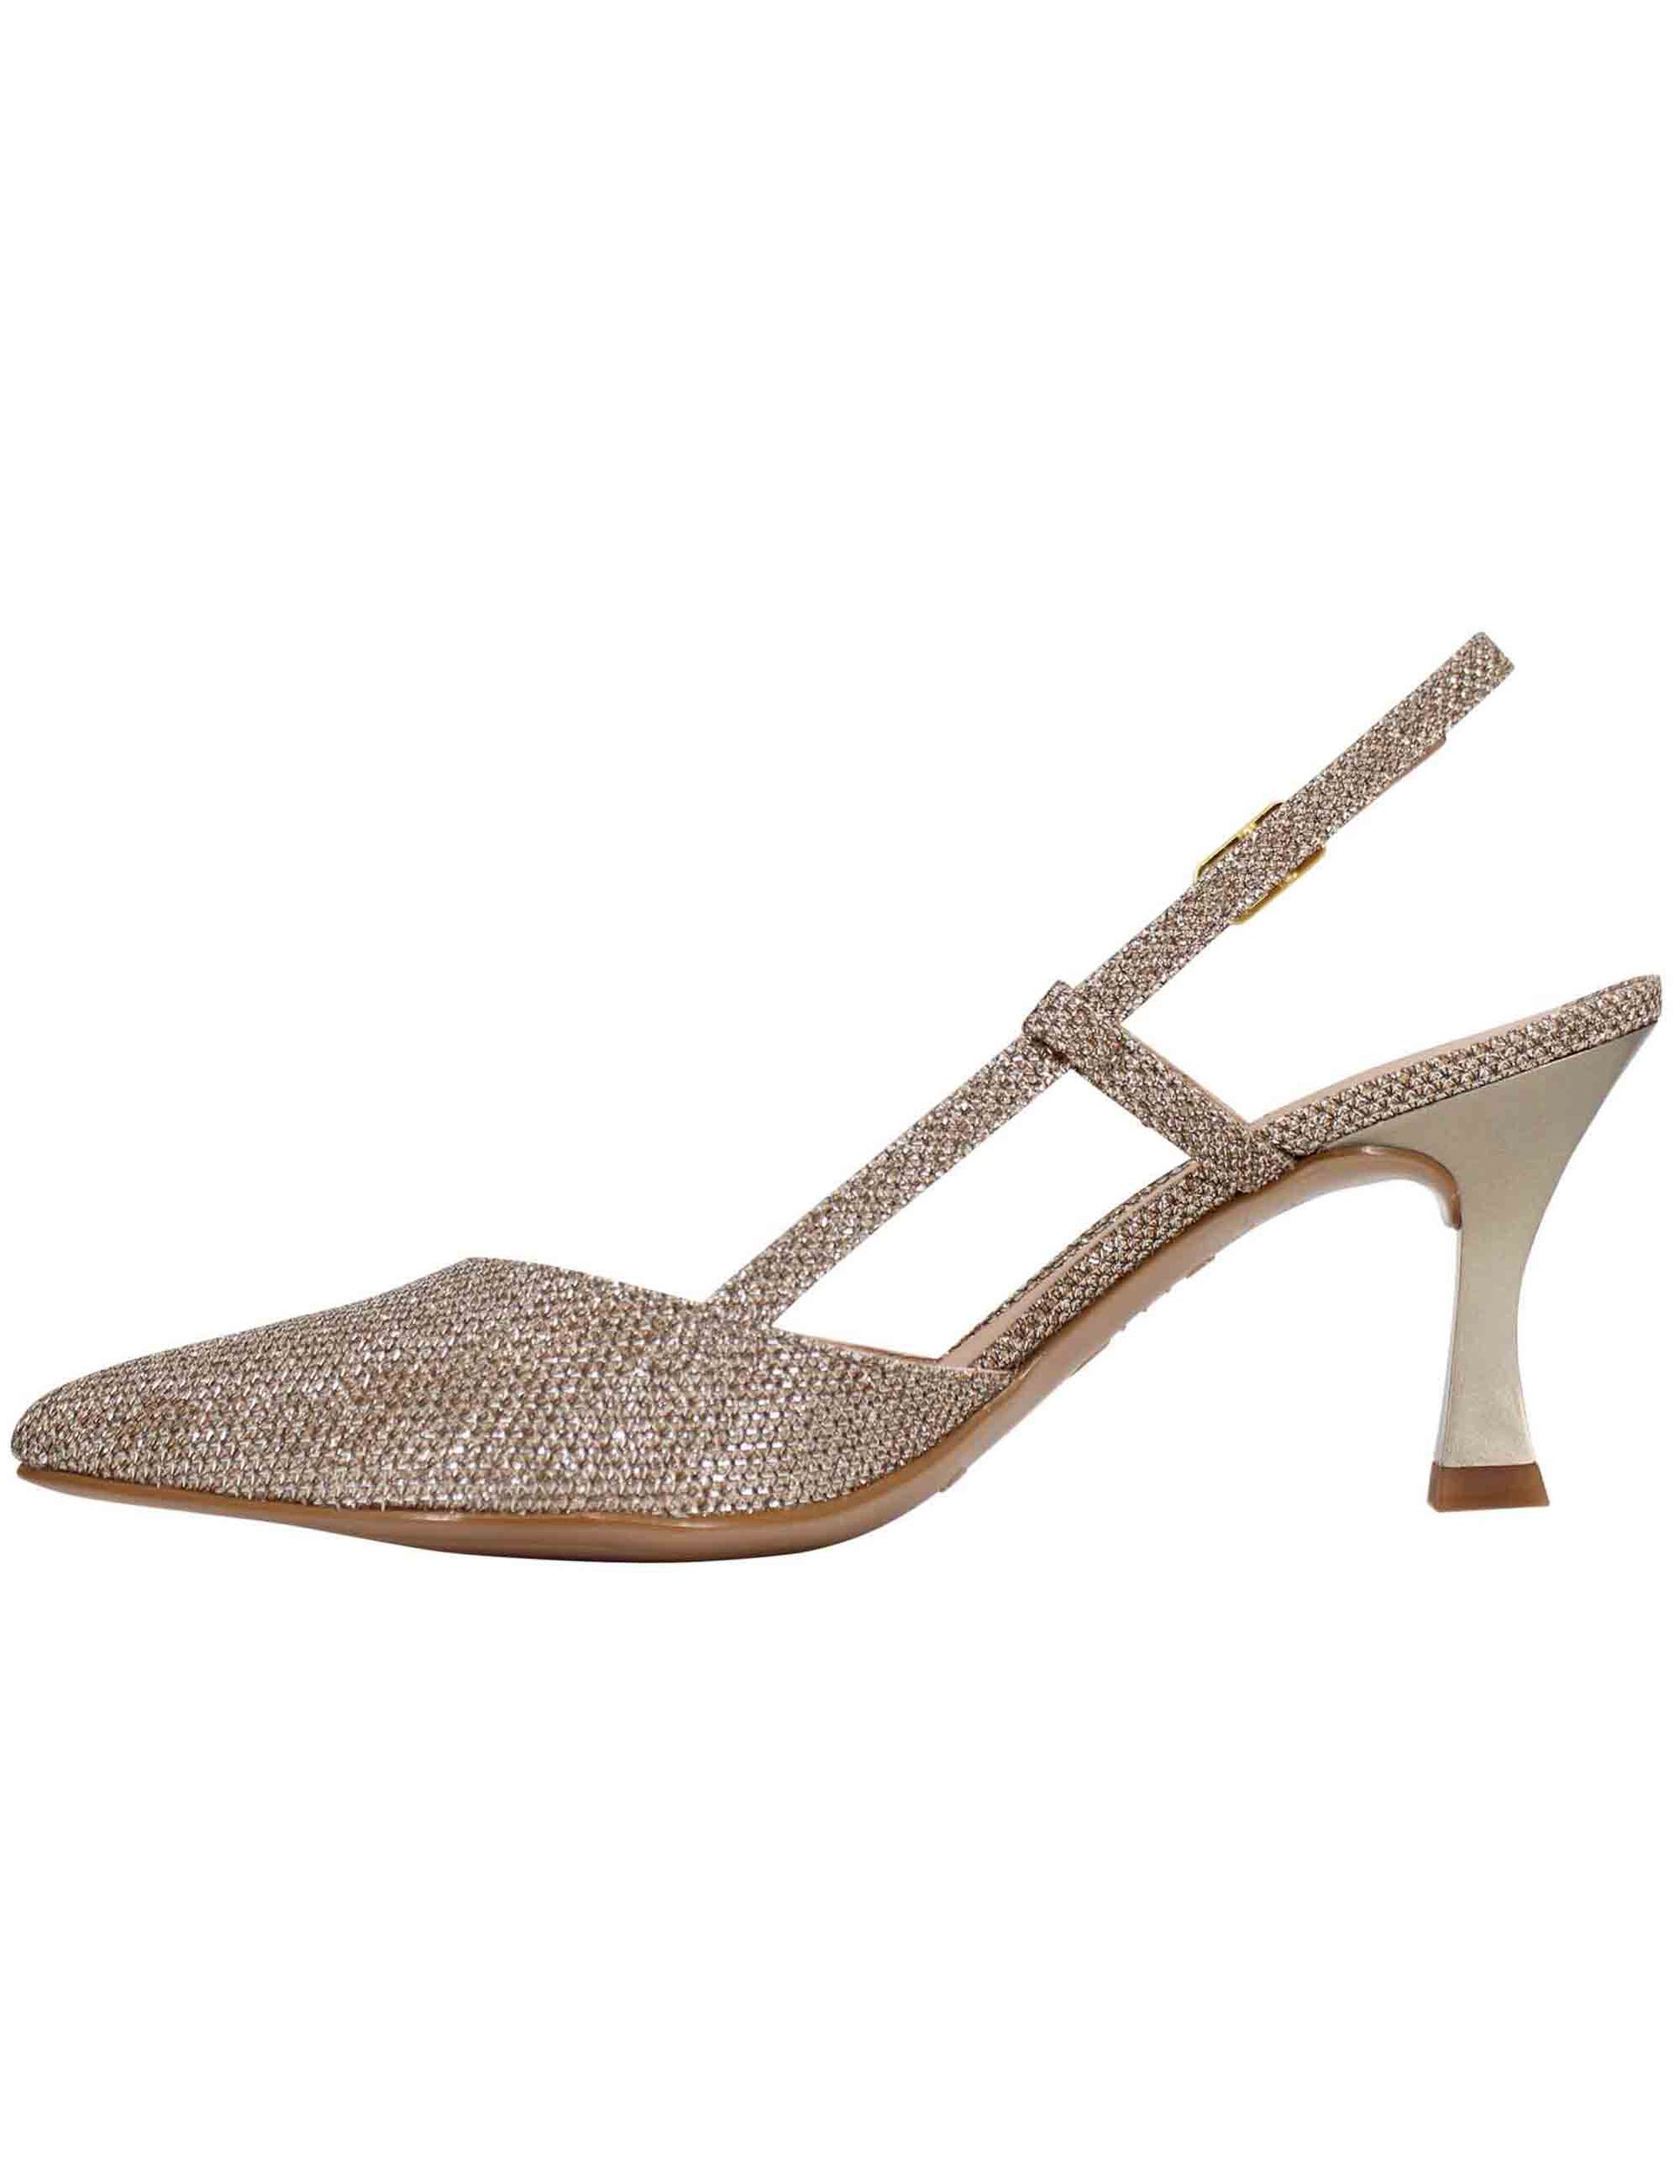 Women's slingback pumps in shiny bronze fabric with high heel